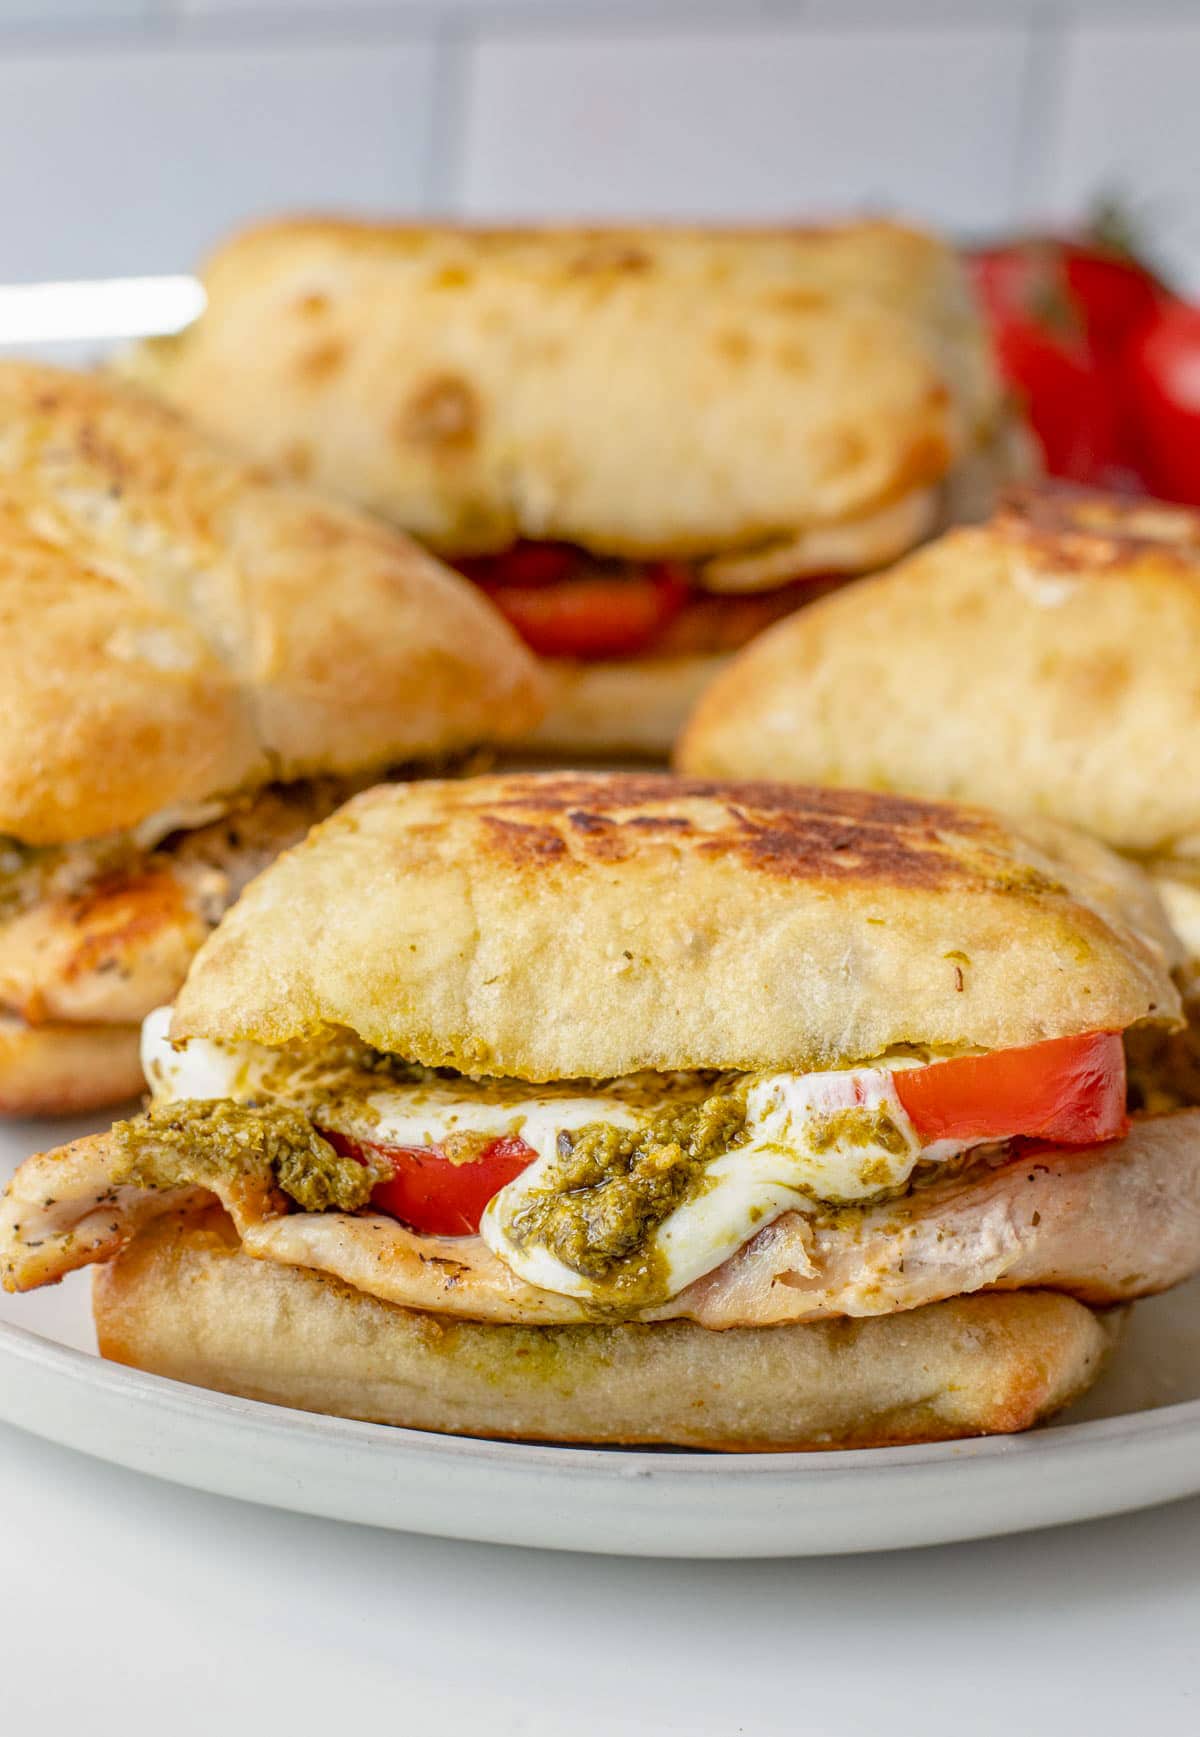 4 chicken pesto sandwiches with tomato and cheese on a plate.